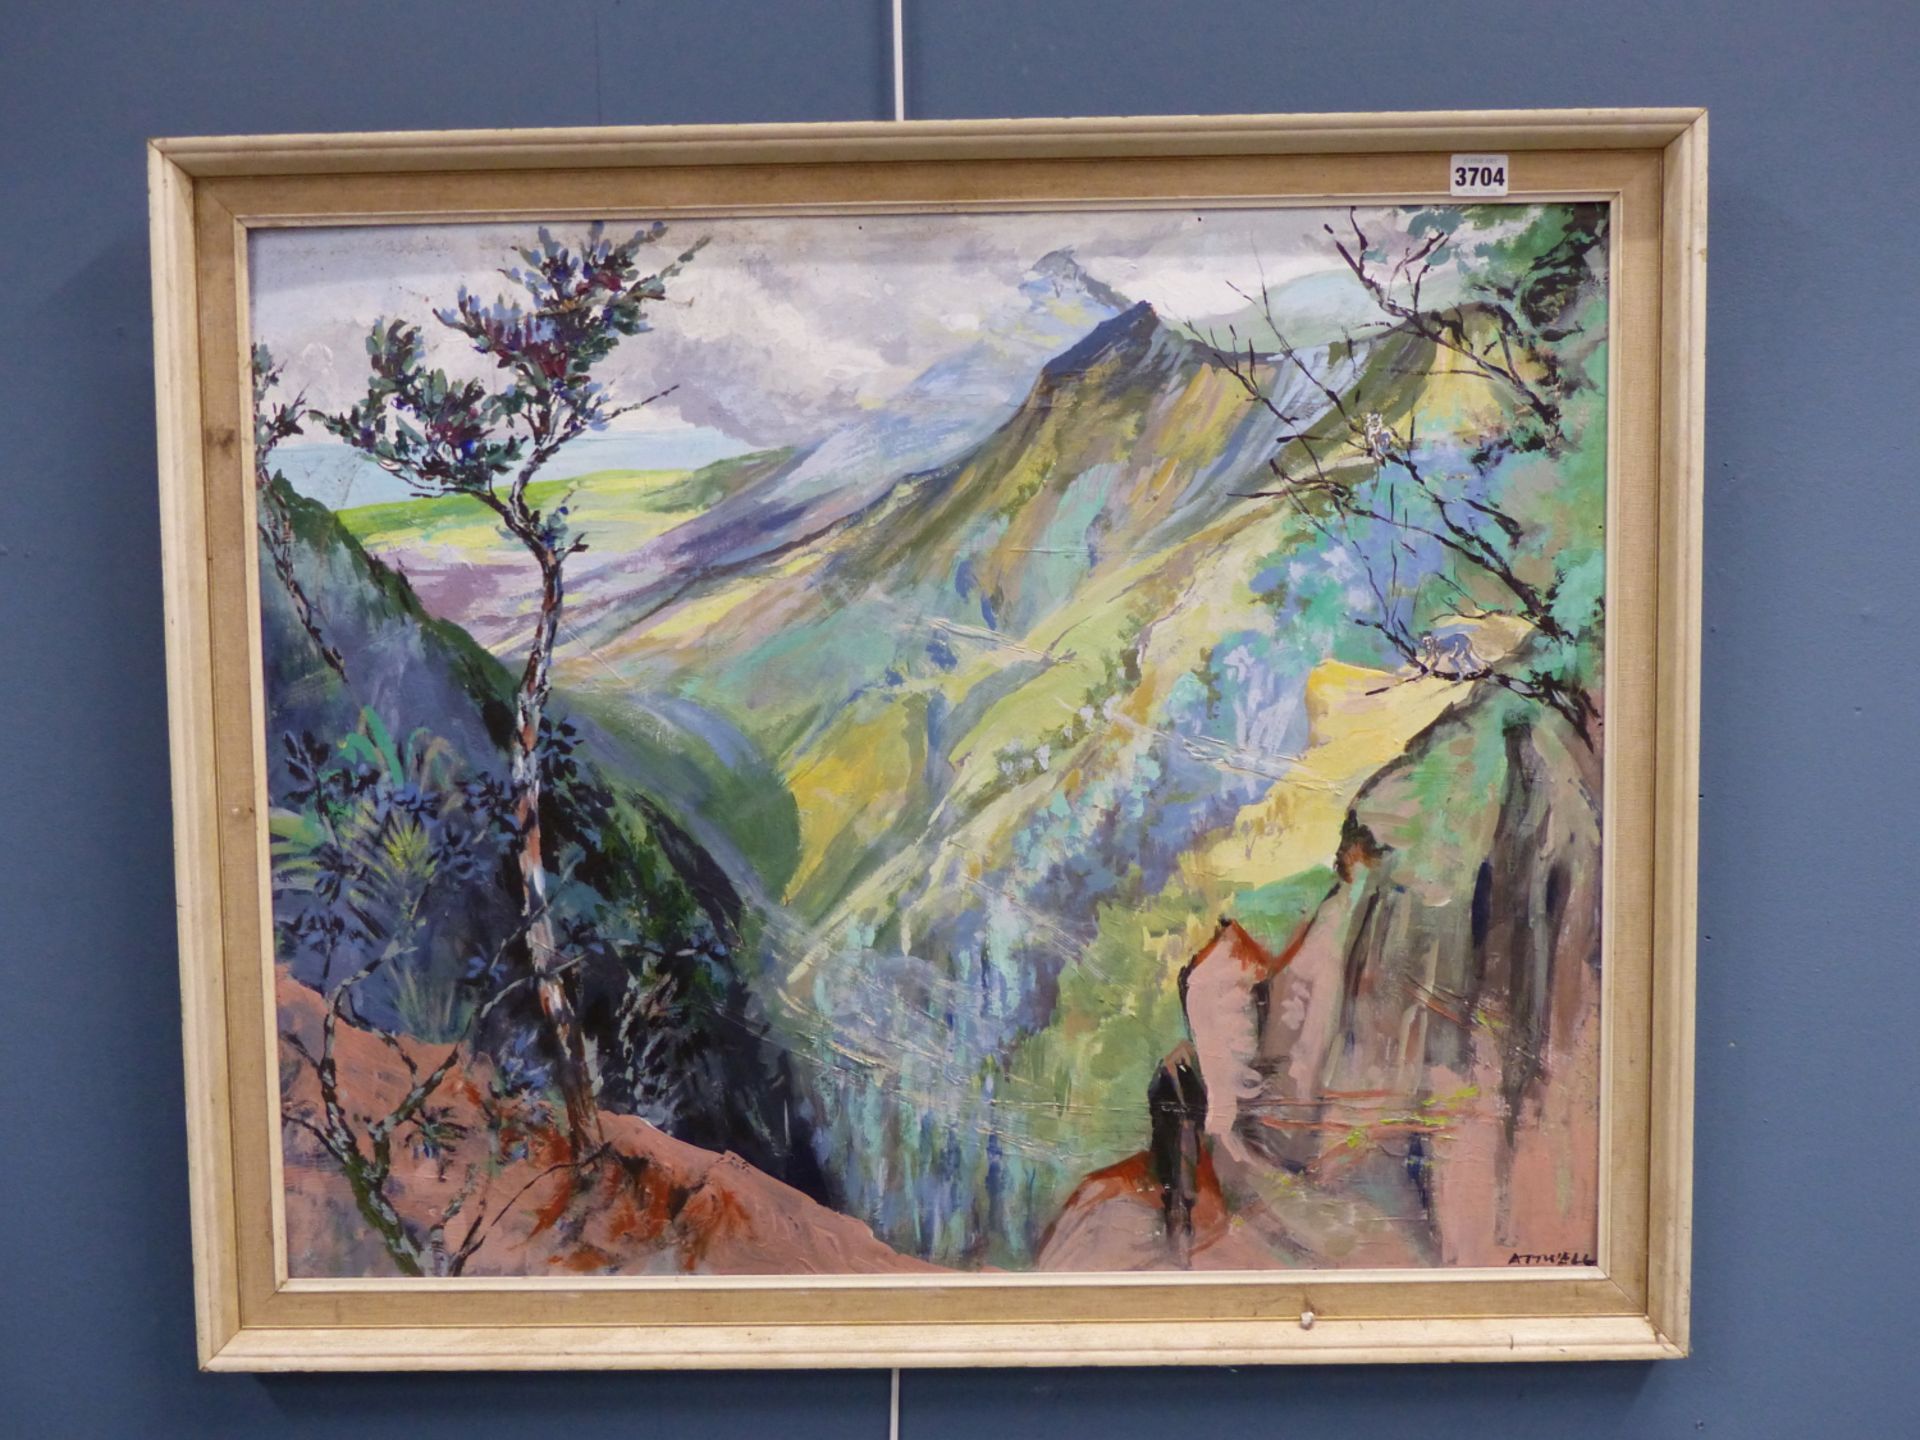 IVY T. ATTWELL (1895-1985) A MOUNTIANOUS VALLEY. OIL ON BOARD. SIGNED L/R. 74 X 59 cm. - Image 2 of 3